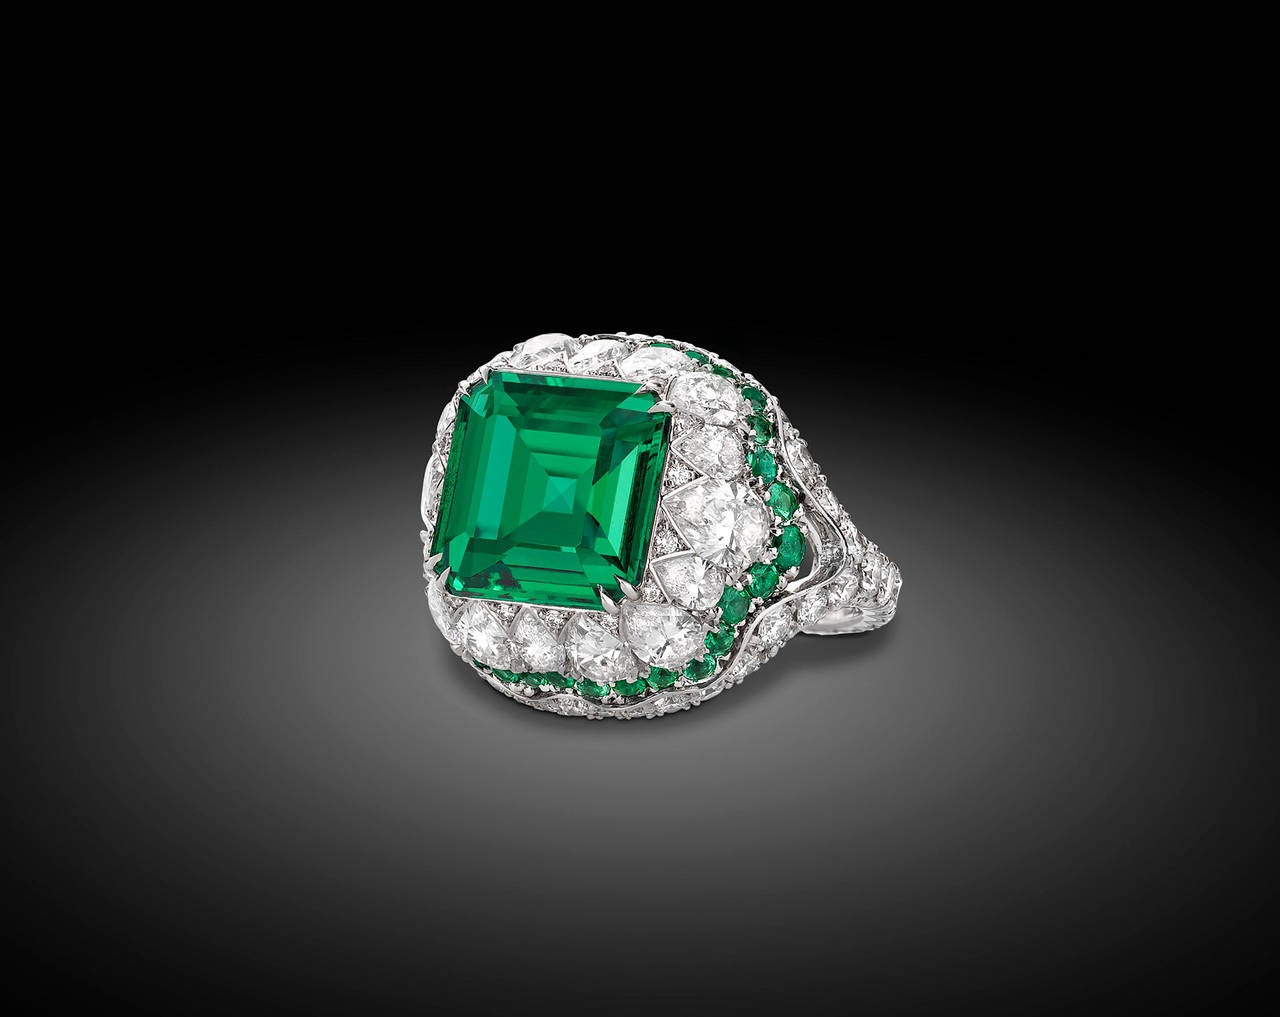 Hailing from the country of Zambia, this amazing 4.31-carat Natural emerald ring displays intense color and amazing clarity. The majority of emeralds on the market are 